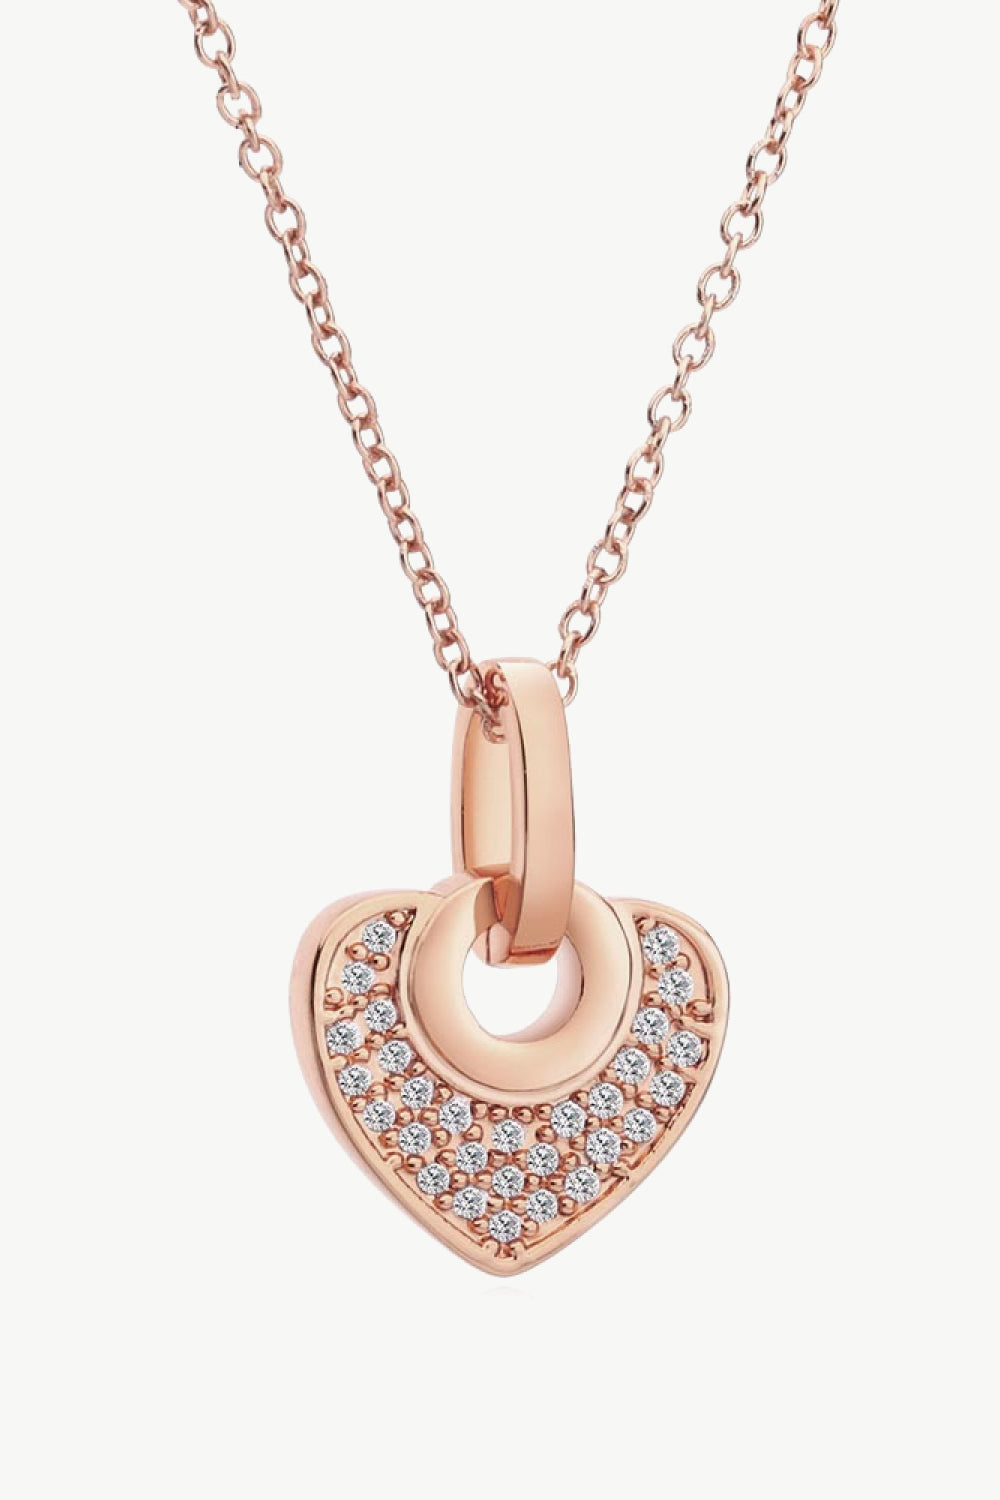 Crystal Heart Pendant Necklace - Necklaces - FITGGINS